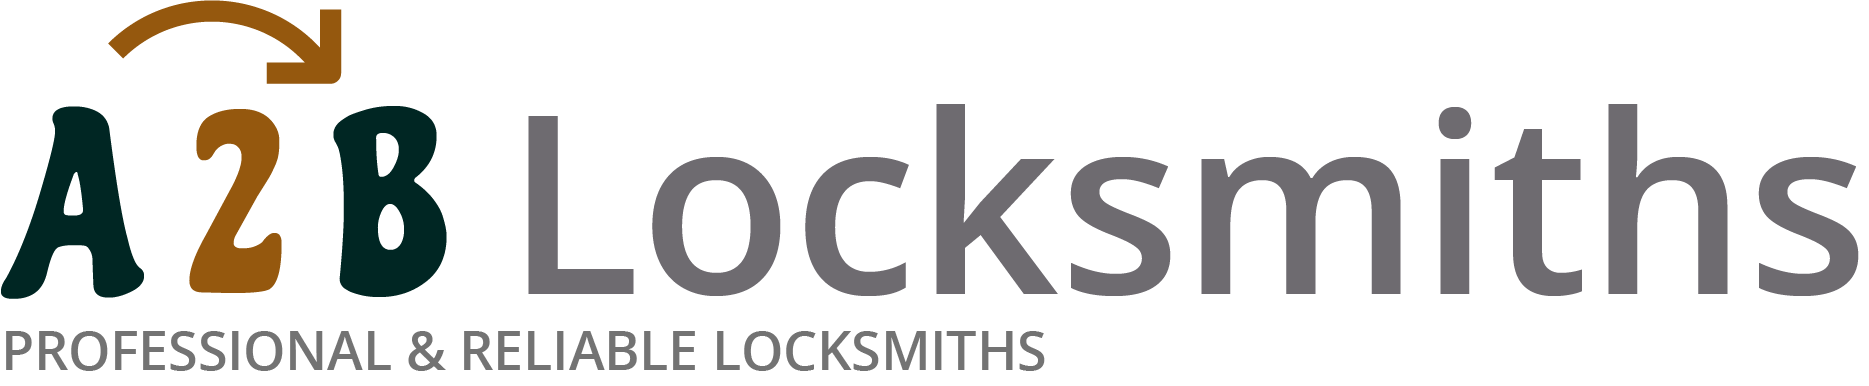 If you are locked out of house in Ashington, our 24/7 local emergency locksmith services can help you.